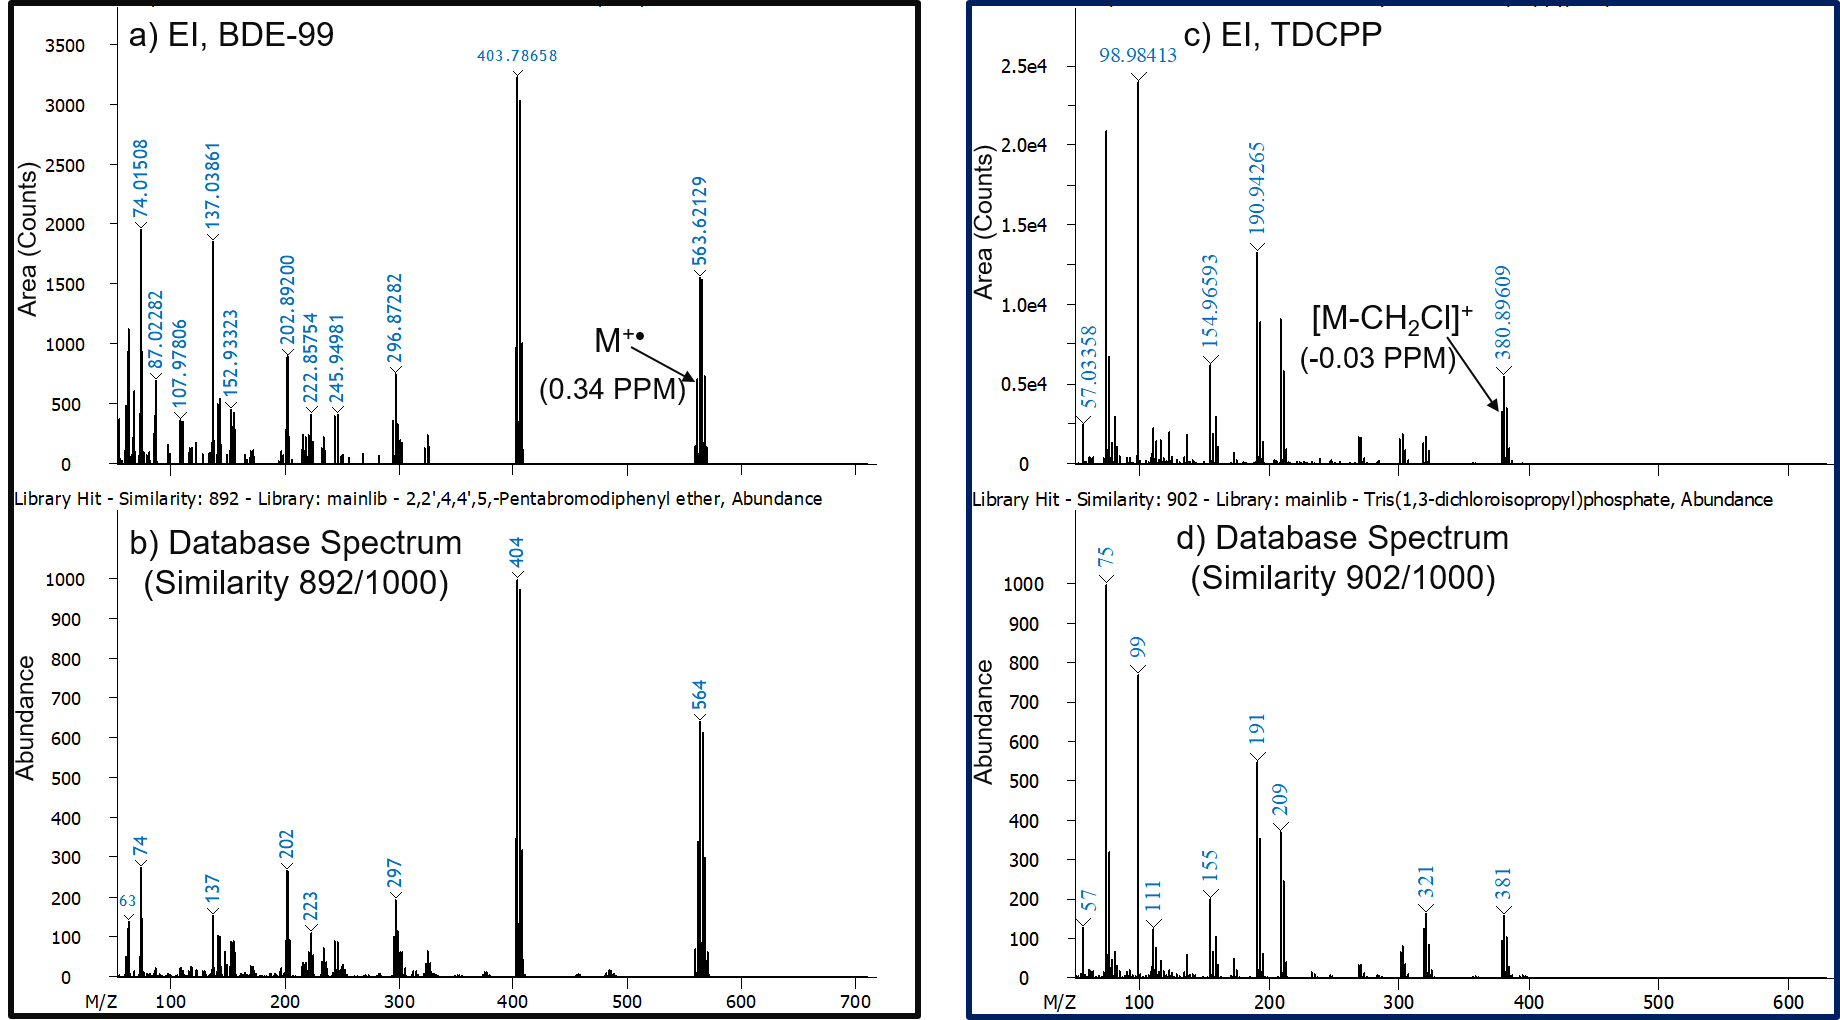 Figure 2: (a) Deconvoluted and (b) database EI mass spectra for BDE-99. (c) Deconvoluted and (d) database mass spectra for TDCPP.